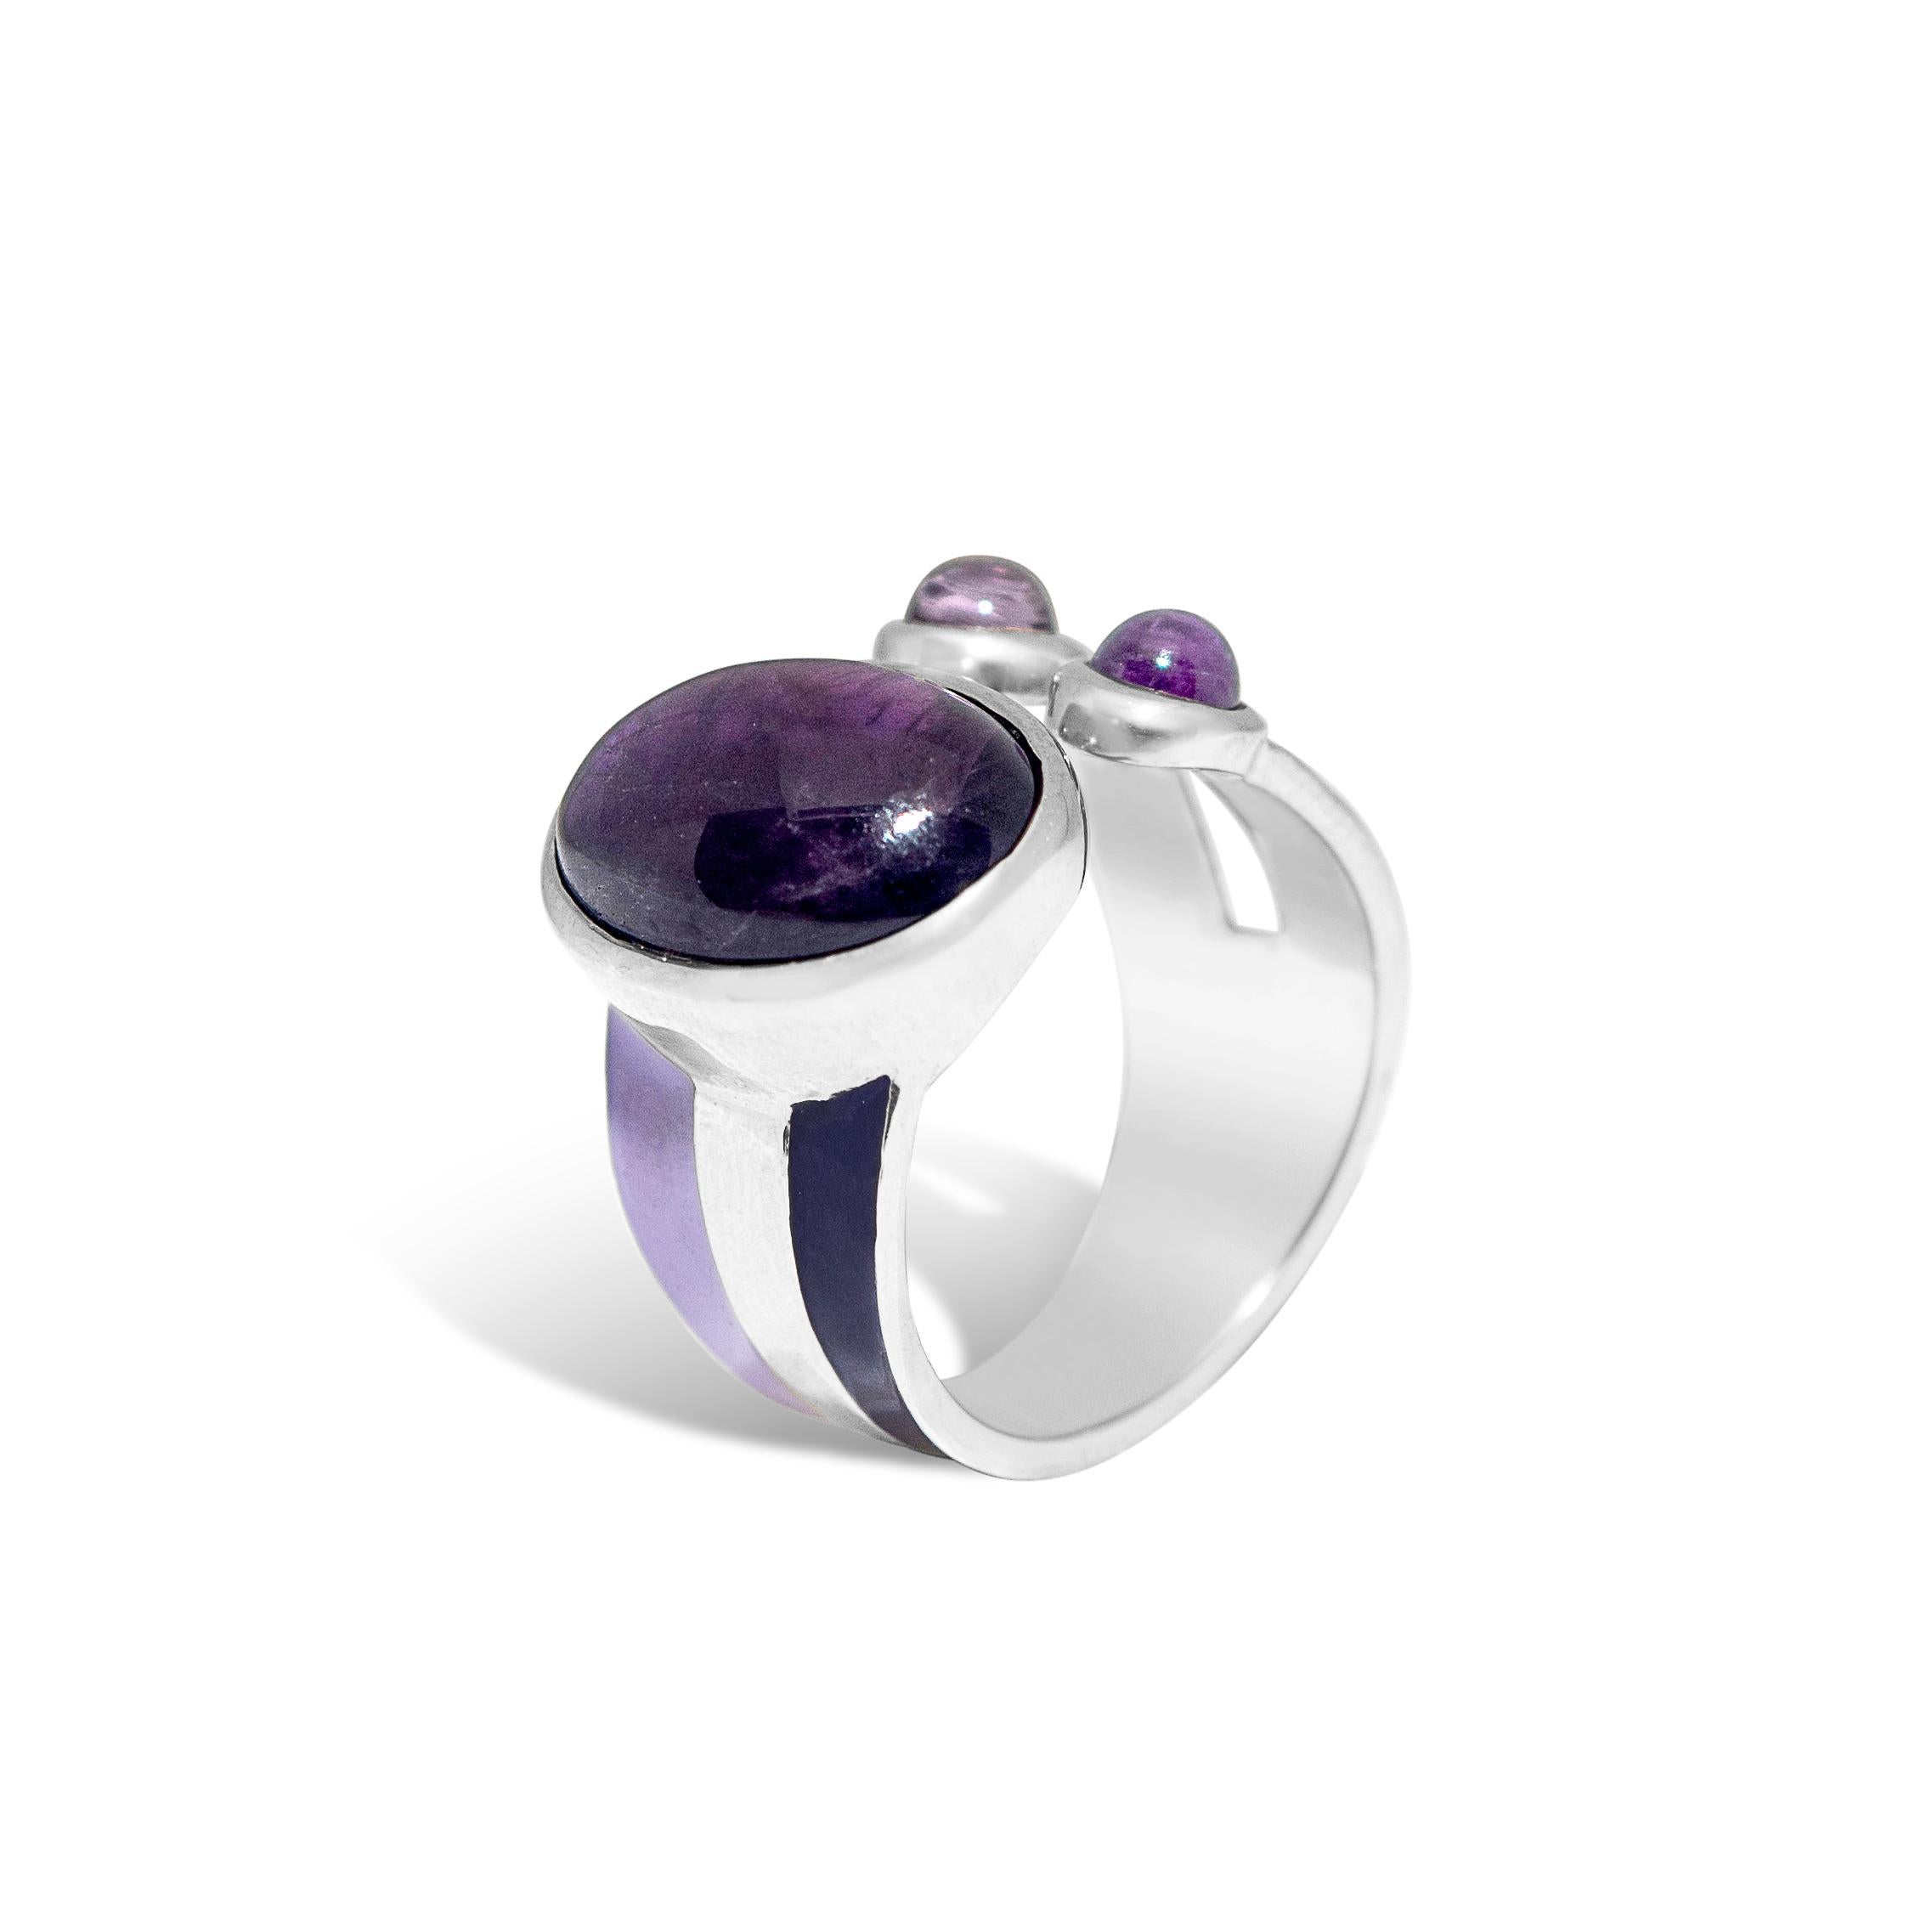 The Purple Striped Ring in polished sterling silver and enamel, set with lilac and deep violet tourmaline stones and amethyst
The design is inspired by the stripe pattern. We are all in love with stripes, so why not wearing striped jewellery